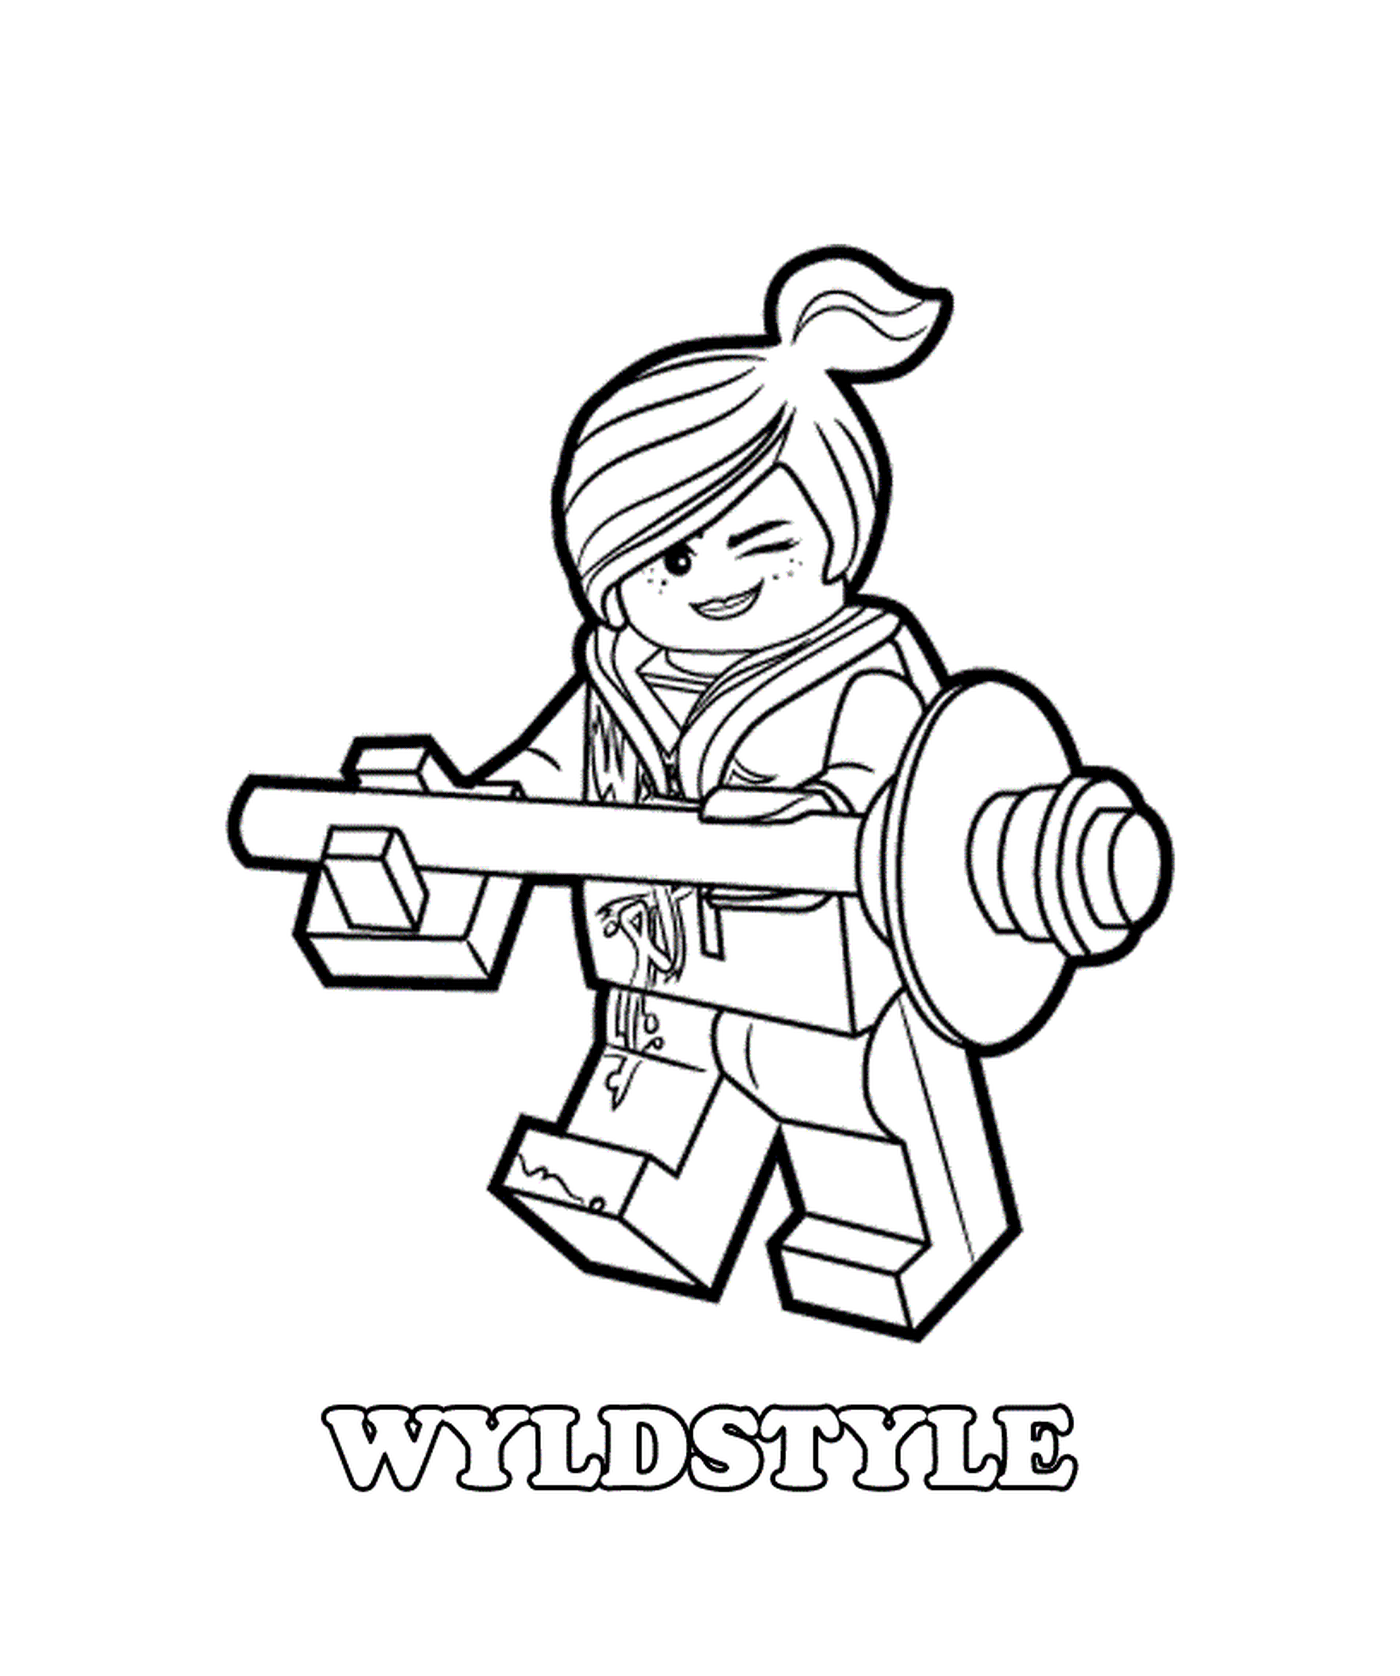  Wyldstyle of the film LEGO 